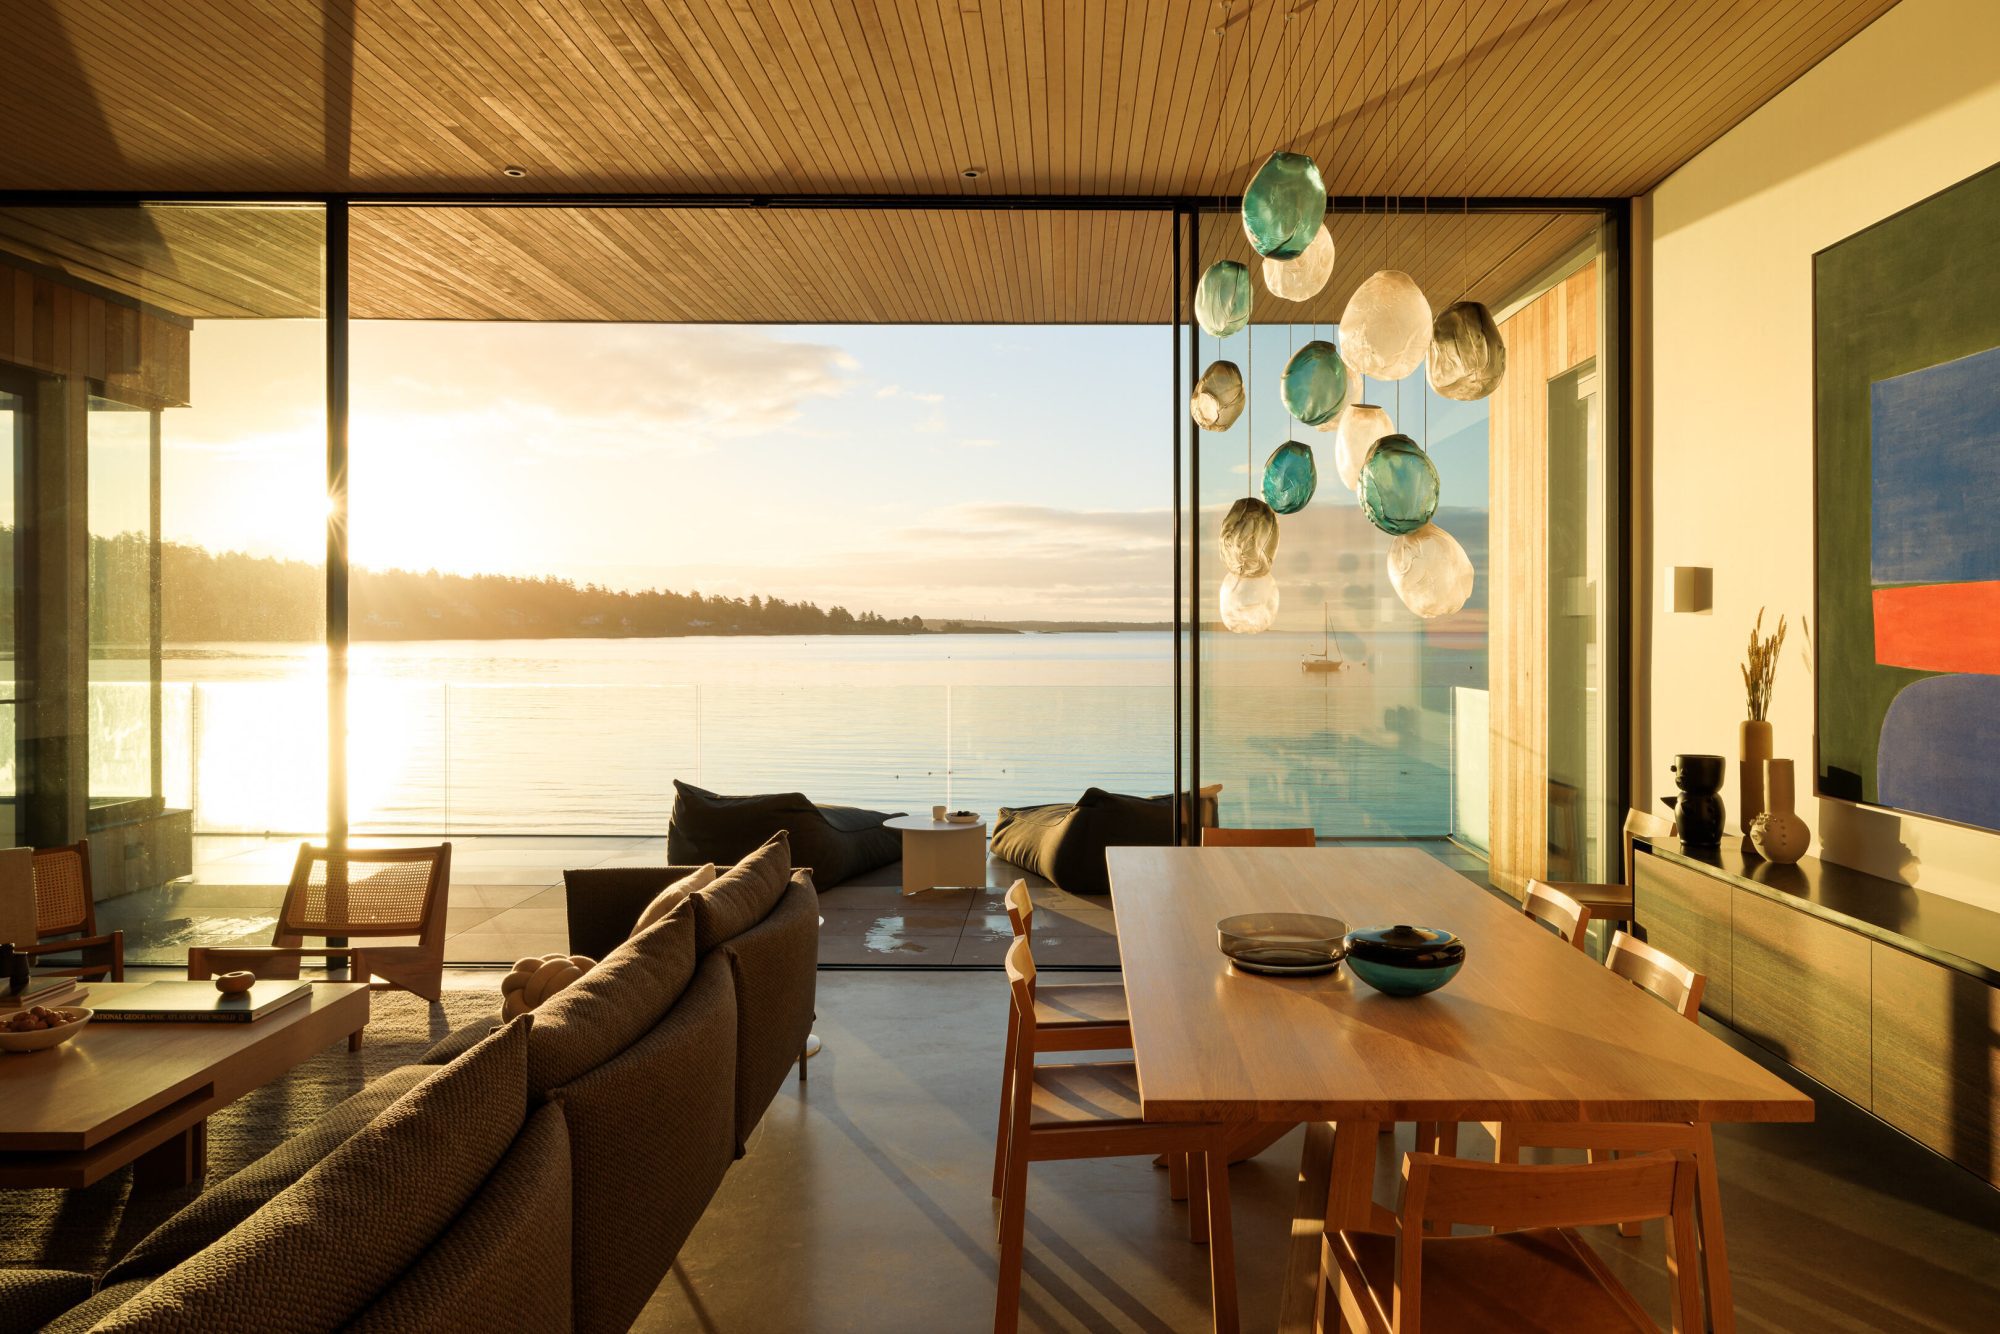 Sun-filled living and dining room looking out on an oceanscape with a tree-covered mountain in the distance. There is a water-glass chandelier hanging overtop a light brown dining table and chairs with large sliding patio doors open.